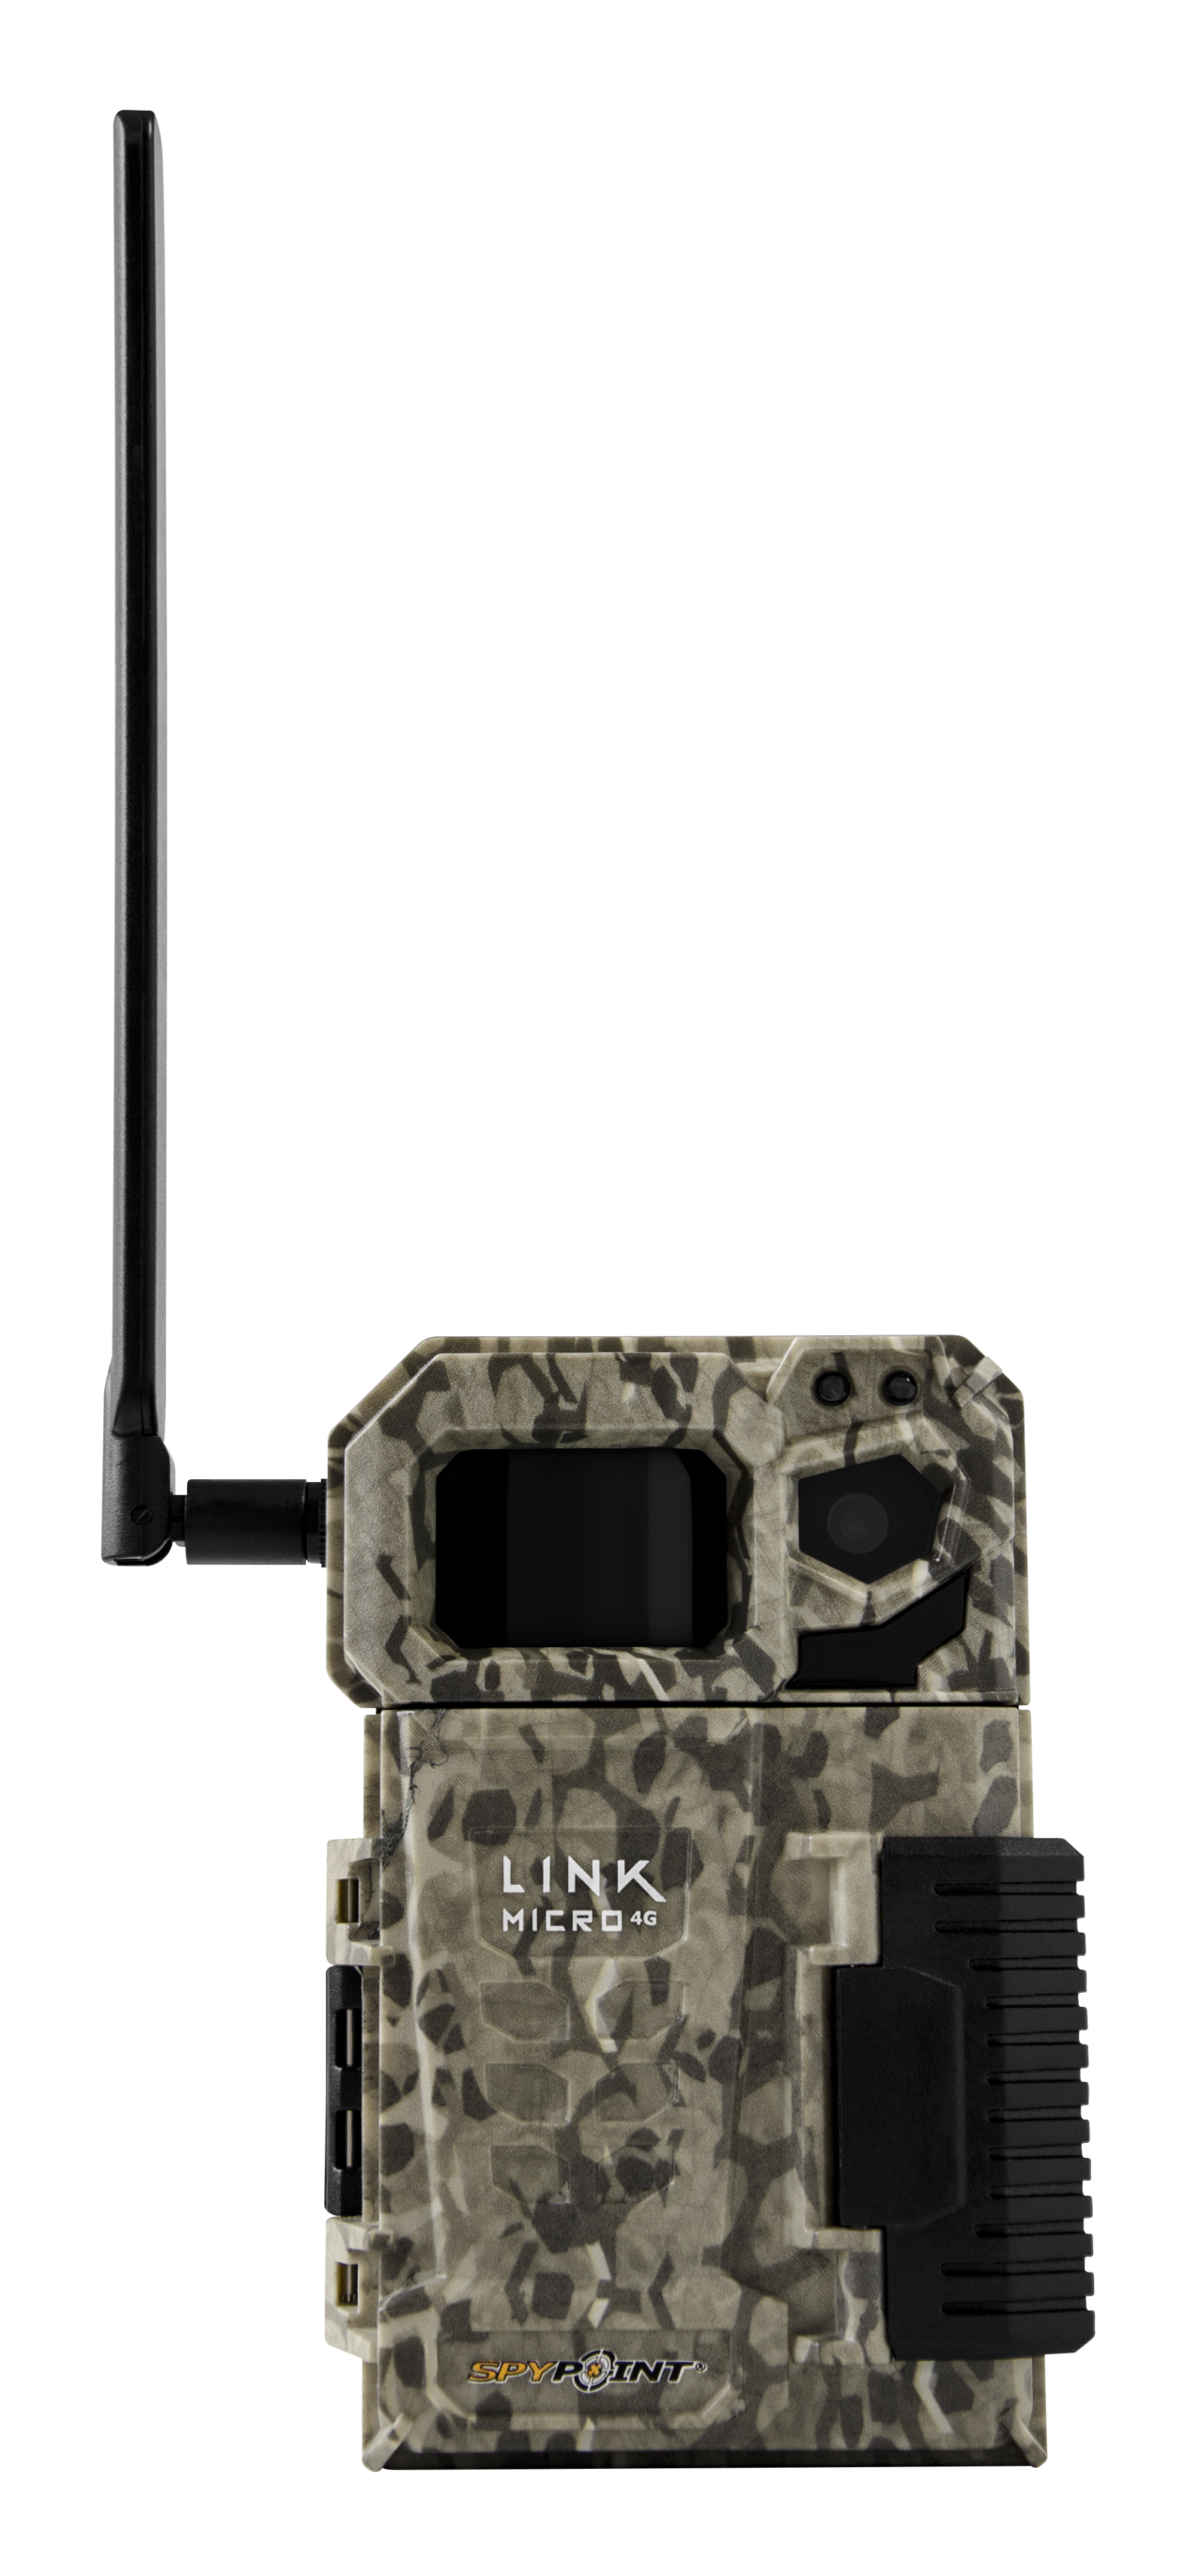 SPYPOINT INTRODUCES WORLD’S SMALLEST CELLULAR TRAIL CAMERA